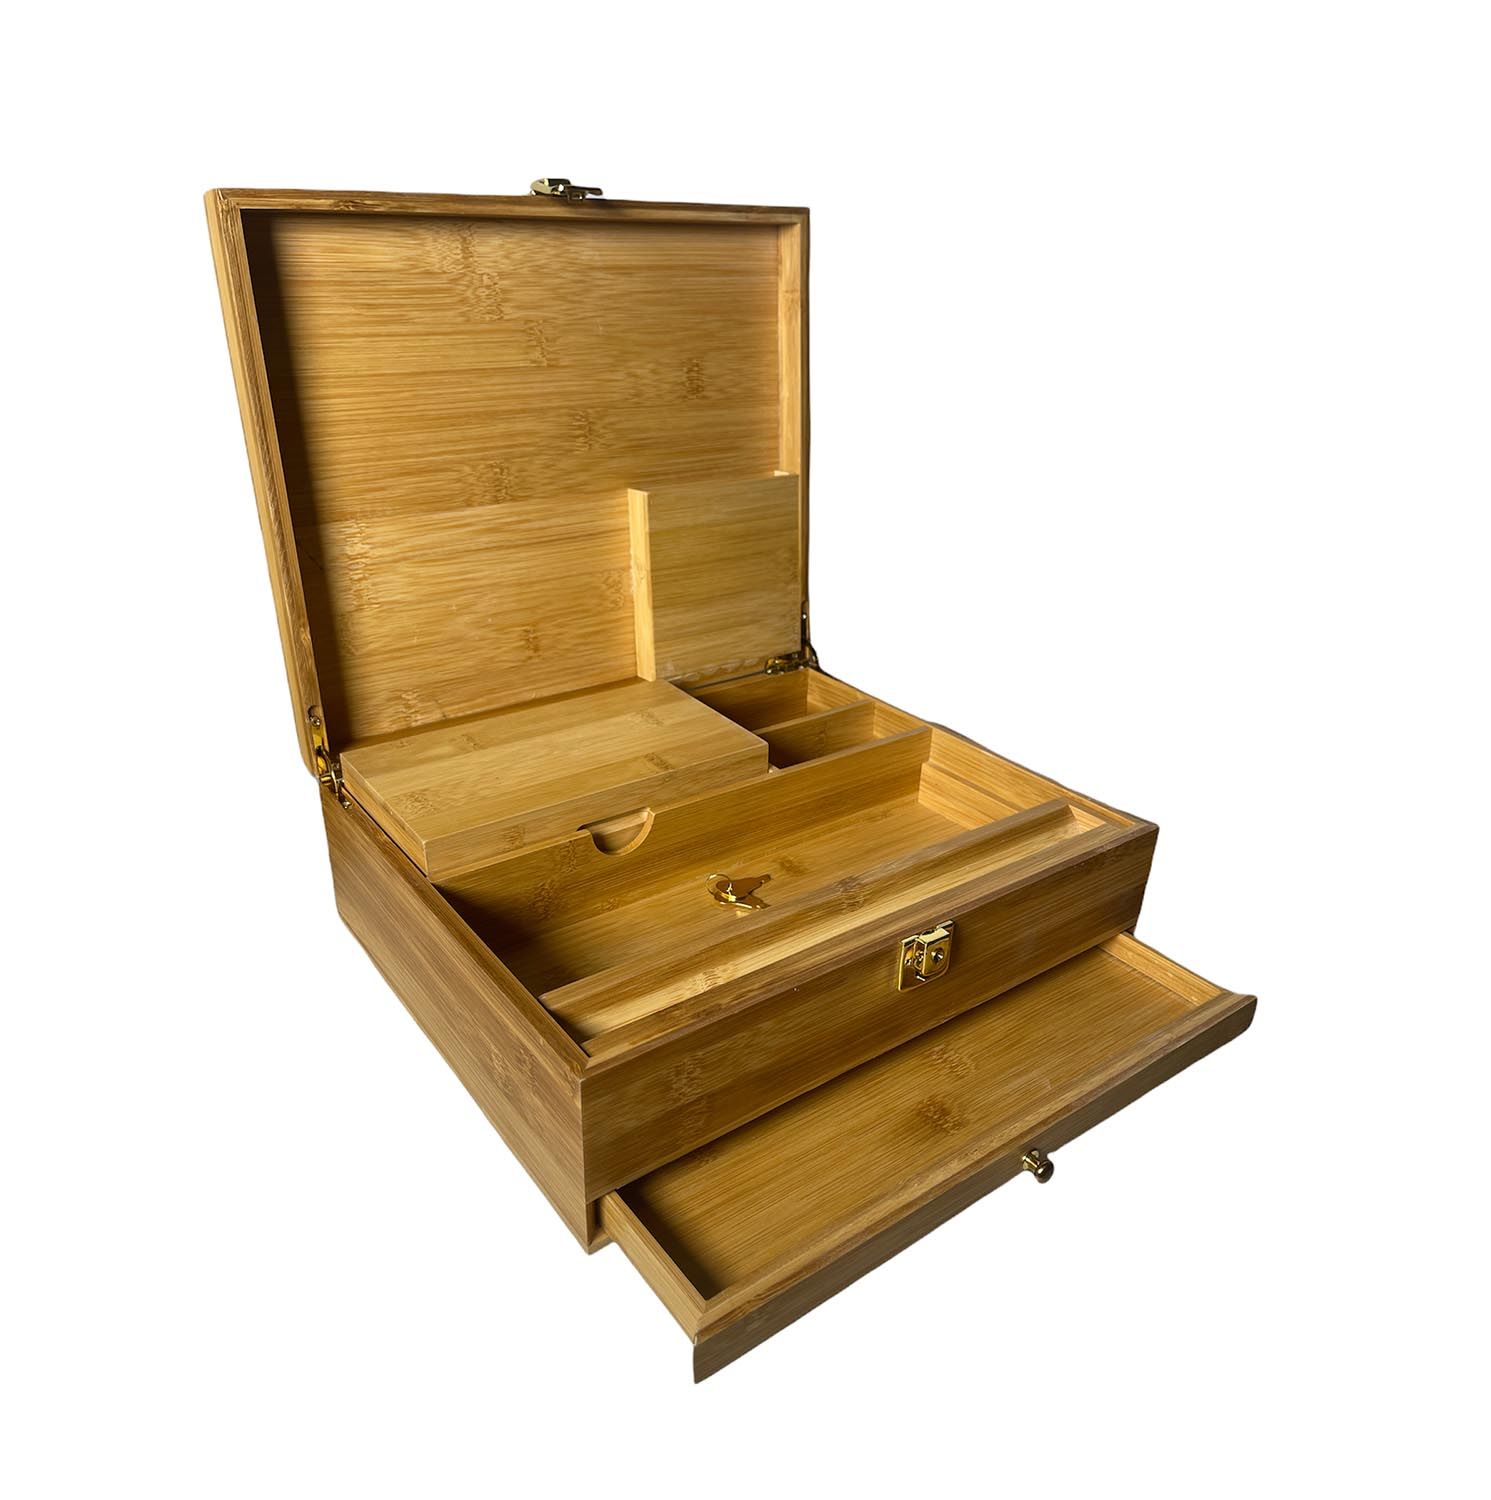 WOODEN ROLLING BOX ROLL BOX SMOKING STASH ALL SIZES